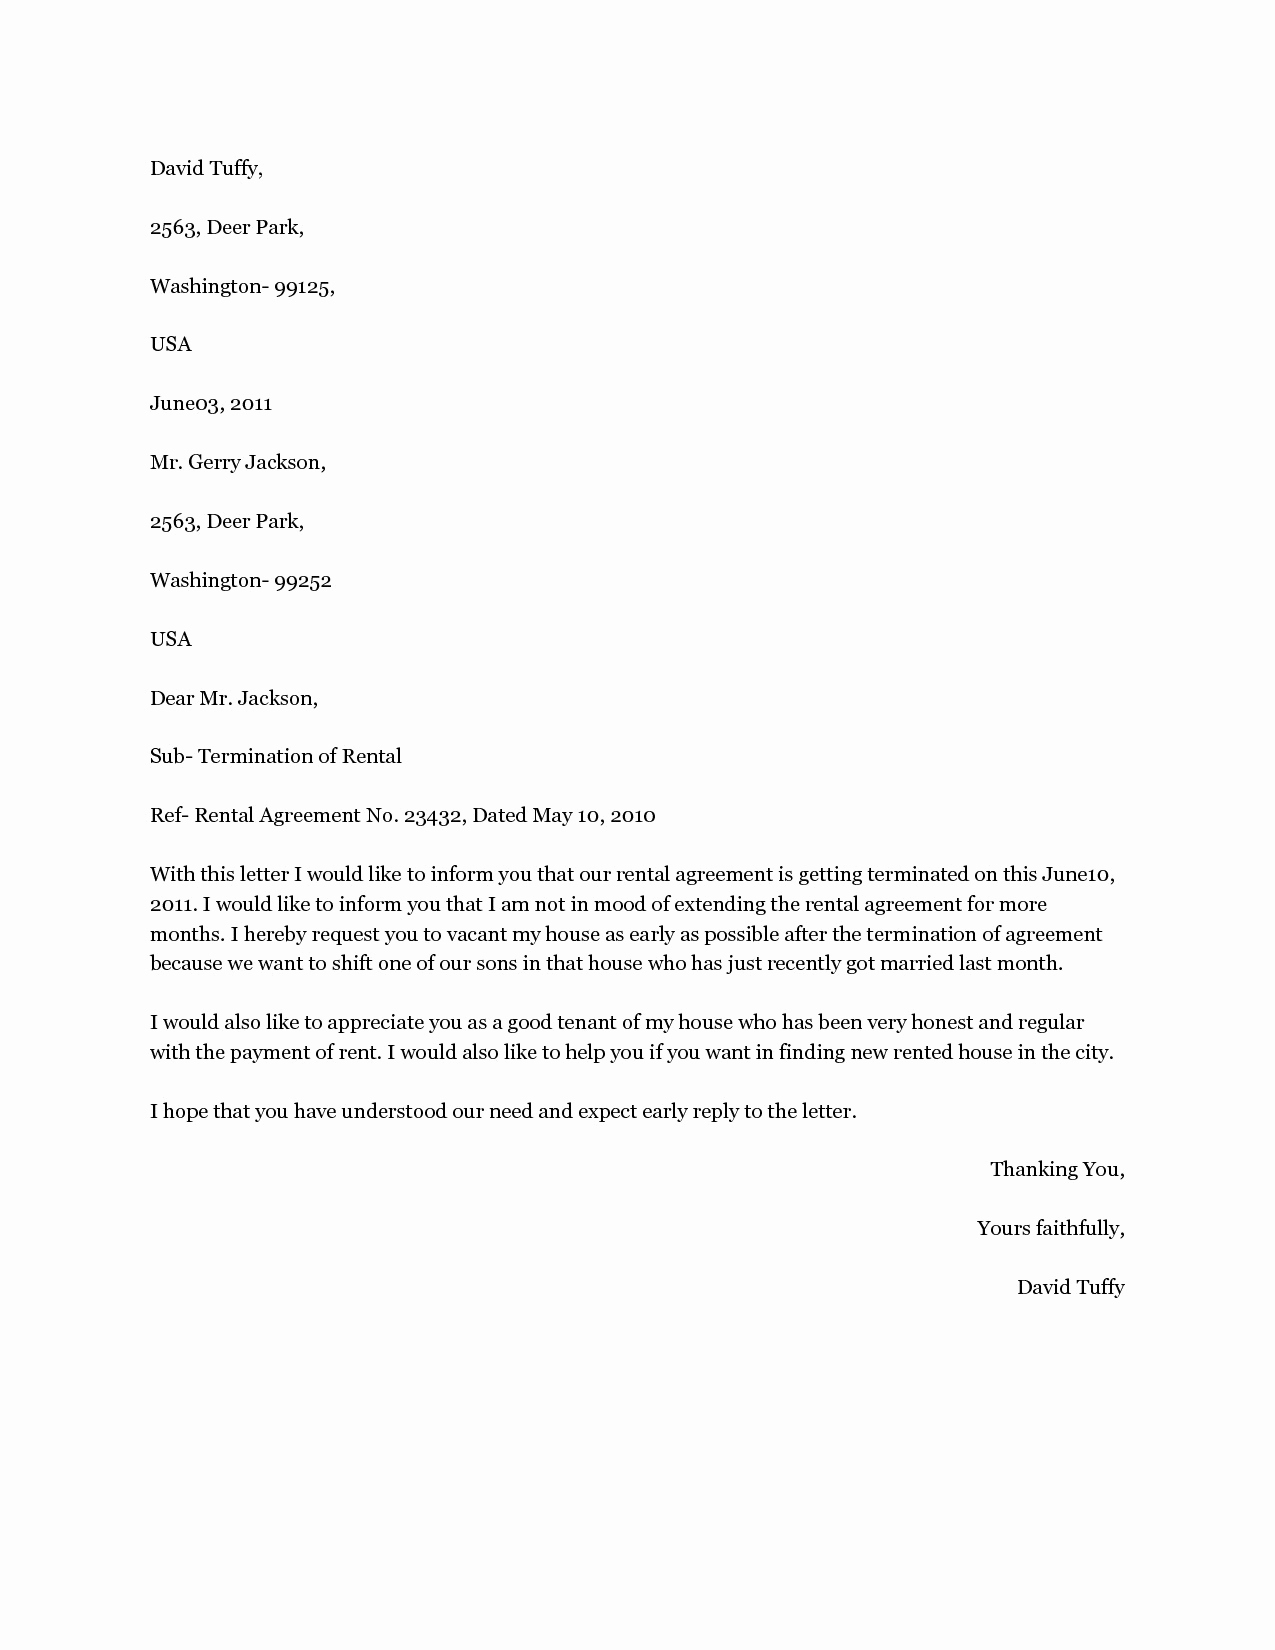 Self Storage Rent Increase Letter Template - 20 Rent Application Cover Letters